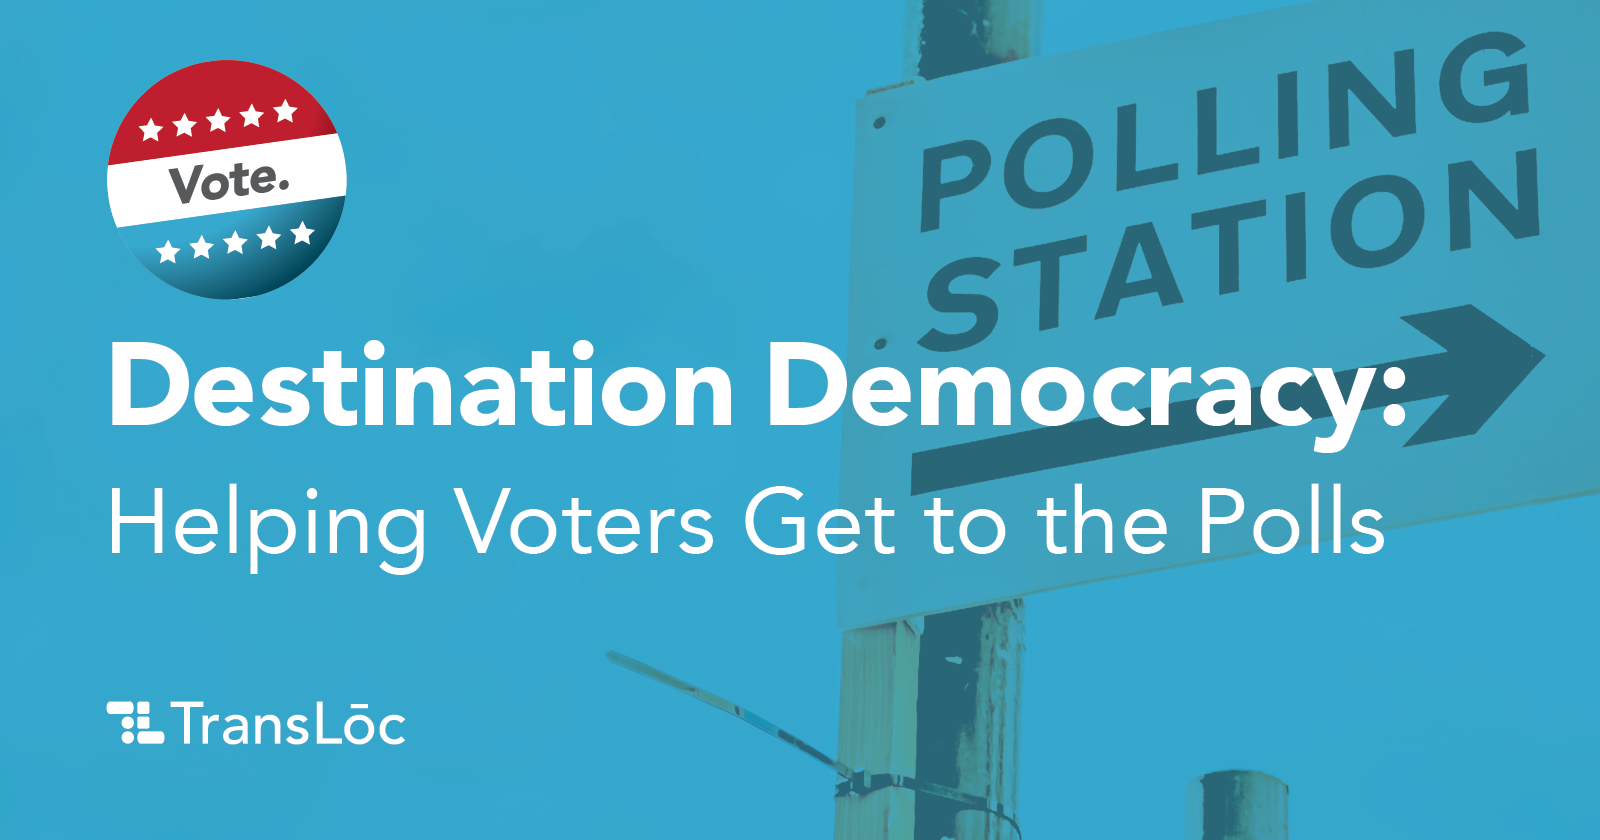 Destination Democracy: Helping Voters Get to the Polls